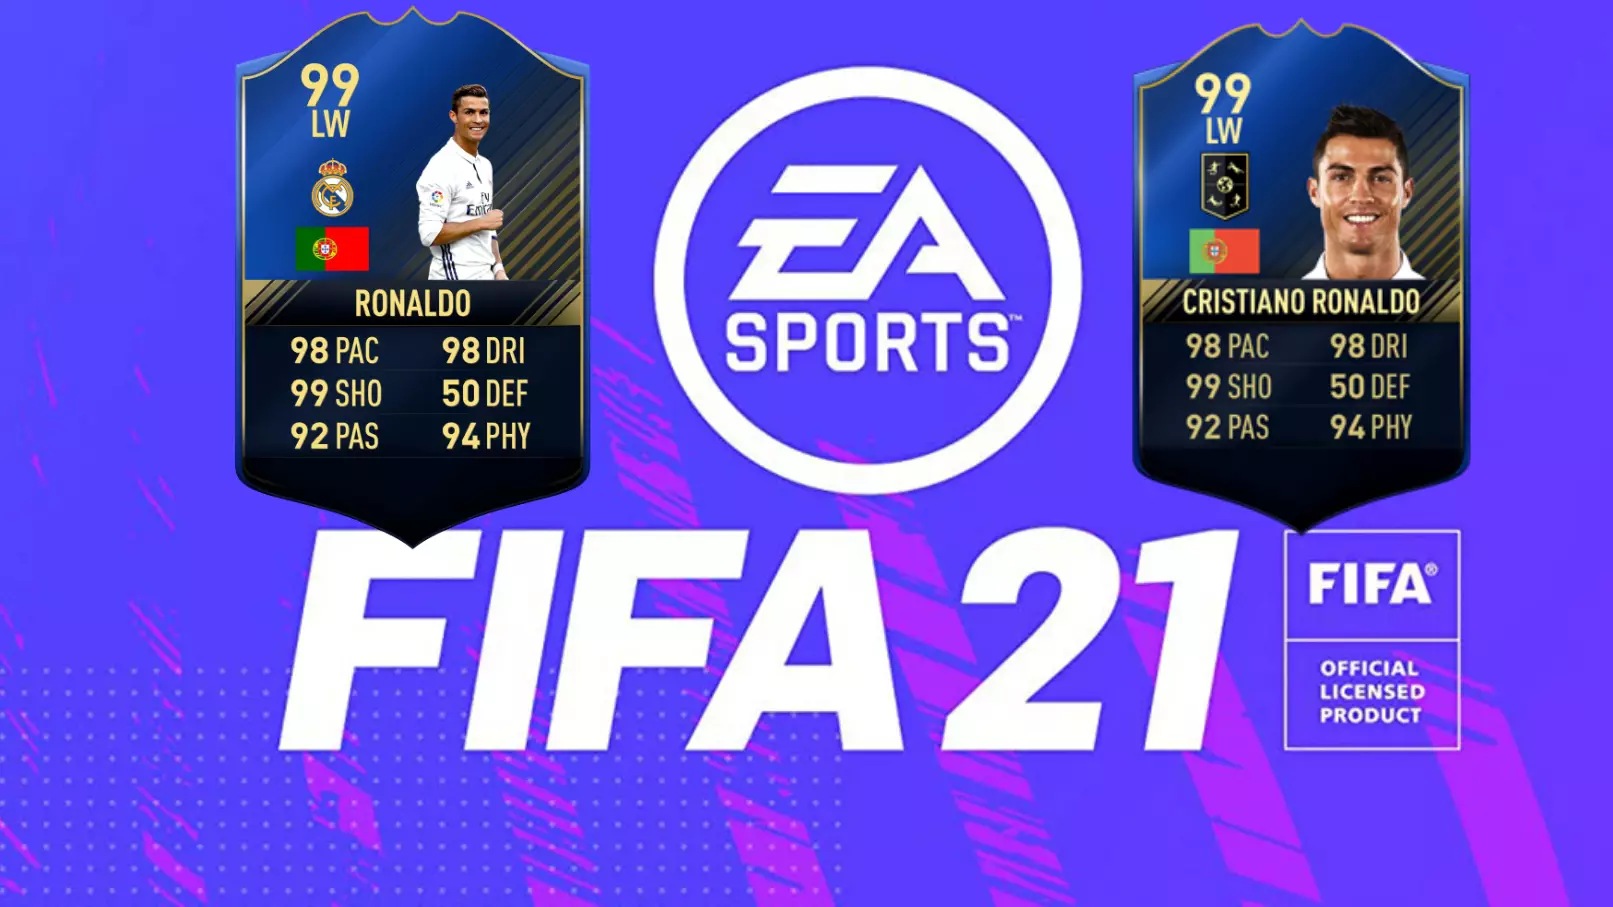 Cristiano Ronaldo Has The Most 99-Rated Cards In FIFA Ultimate Team History